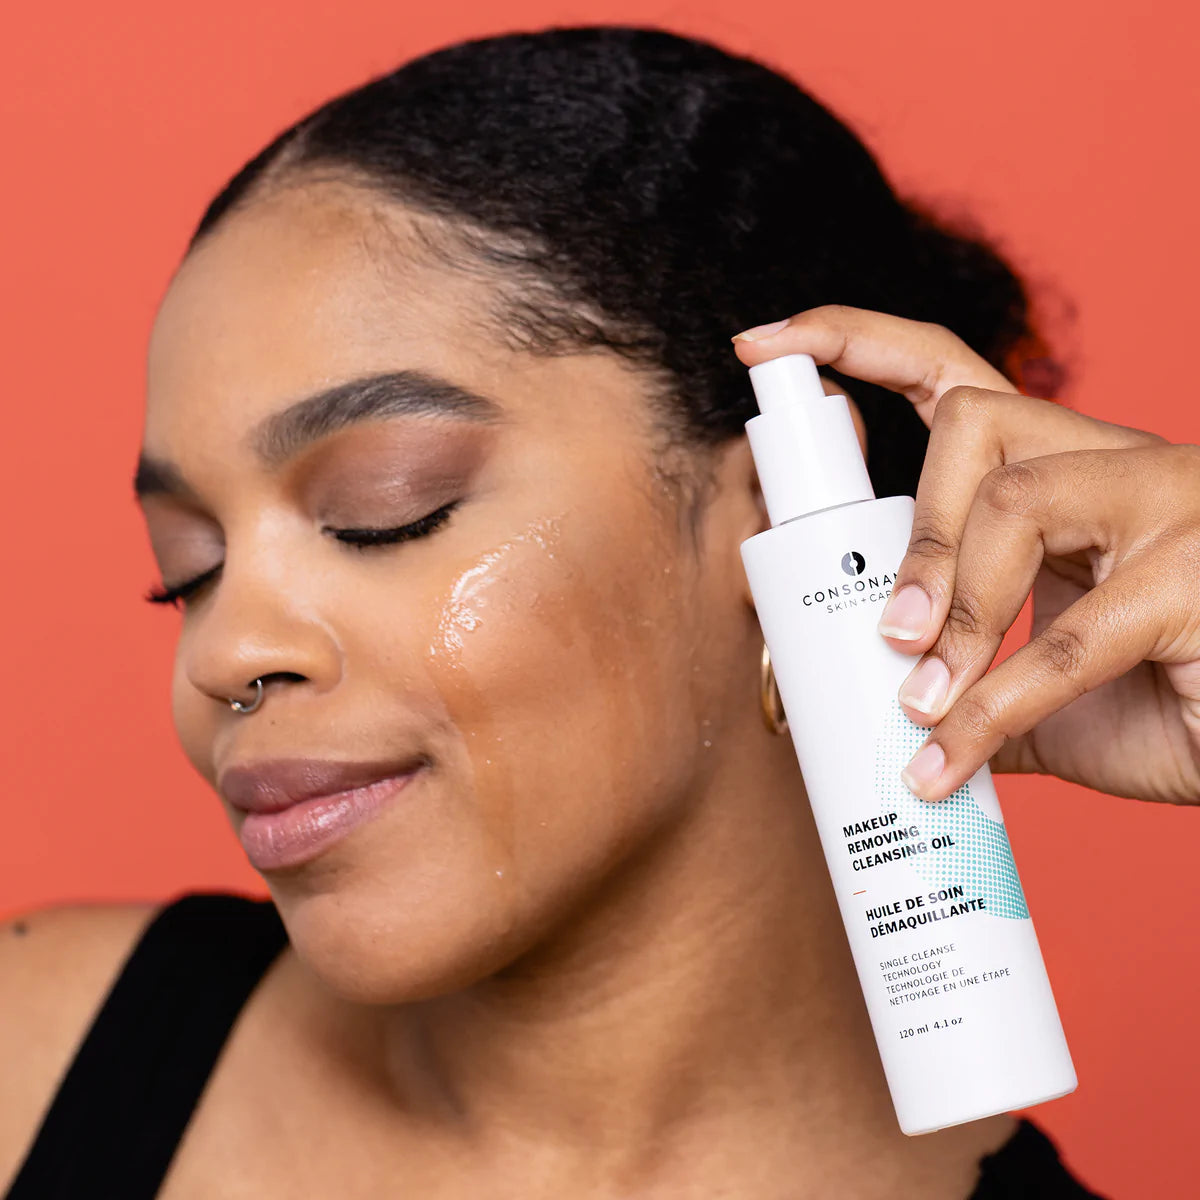 Consonant Makeup Removing Cleansing Oil demo